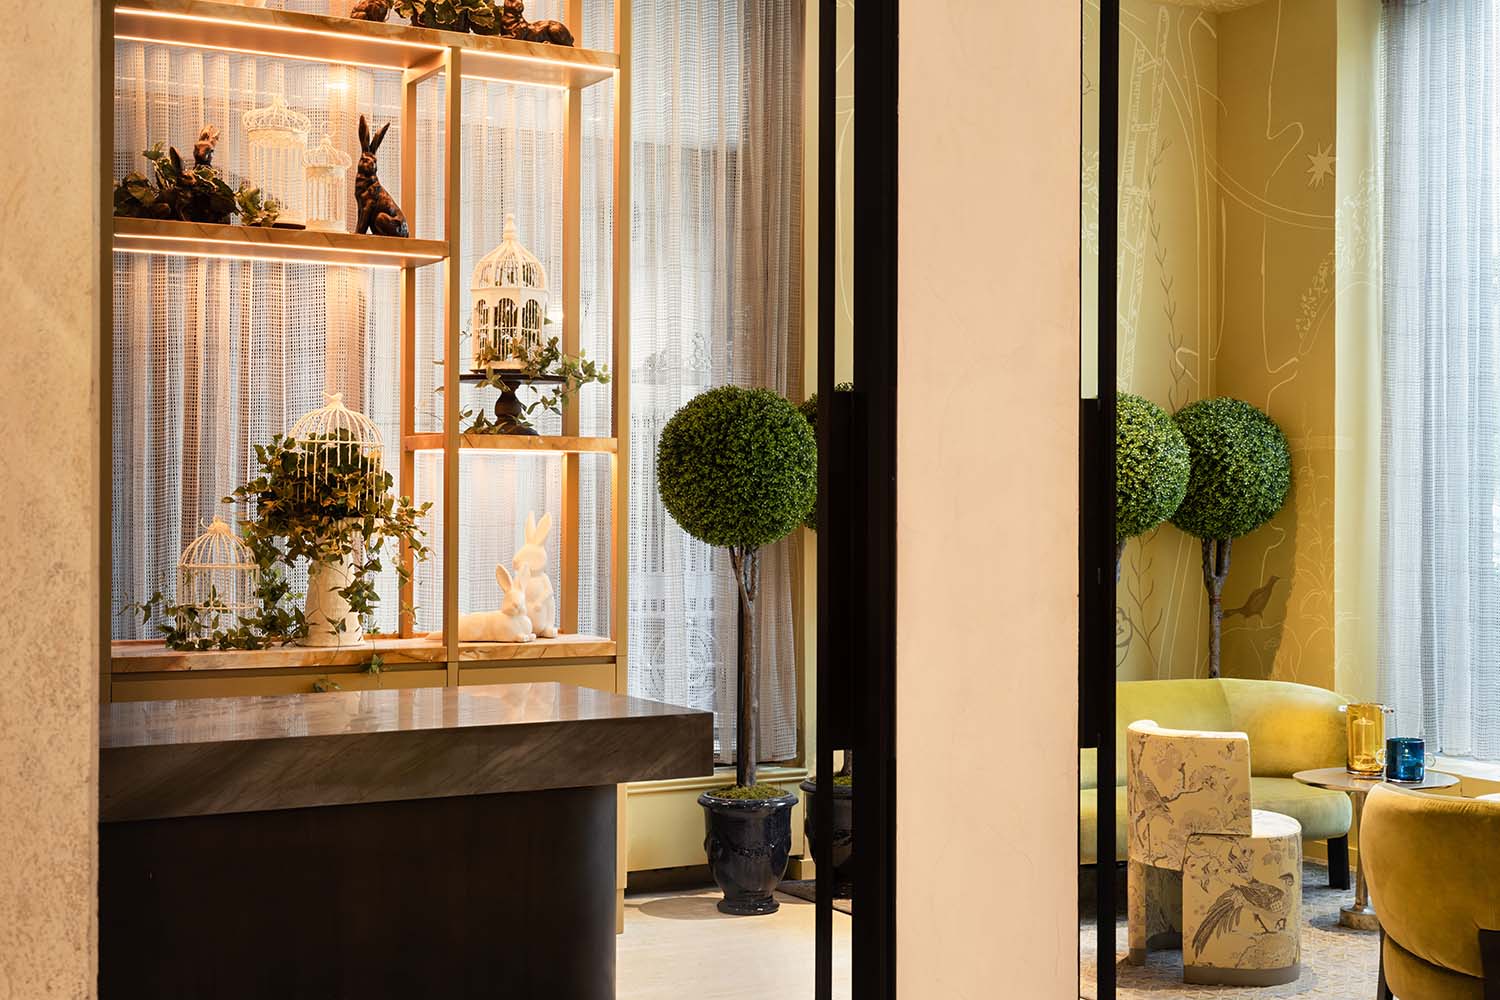 The Park Lane Hotel, New York: an ode to past and present